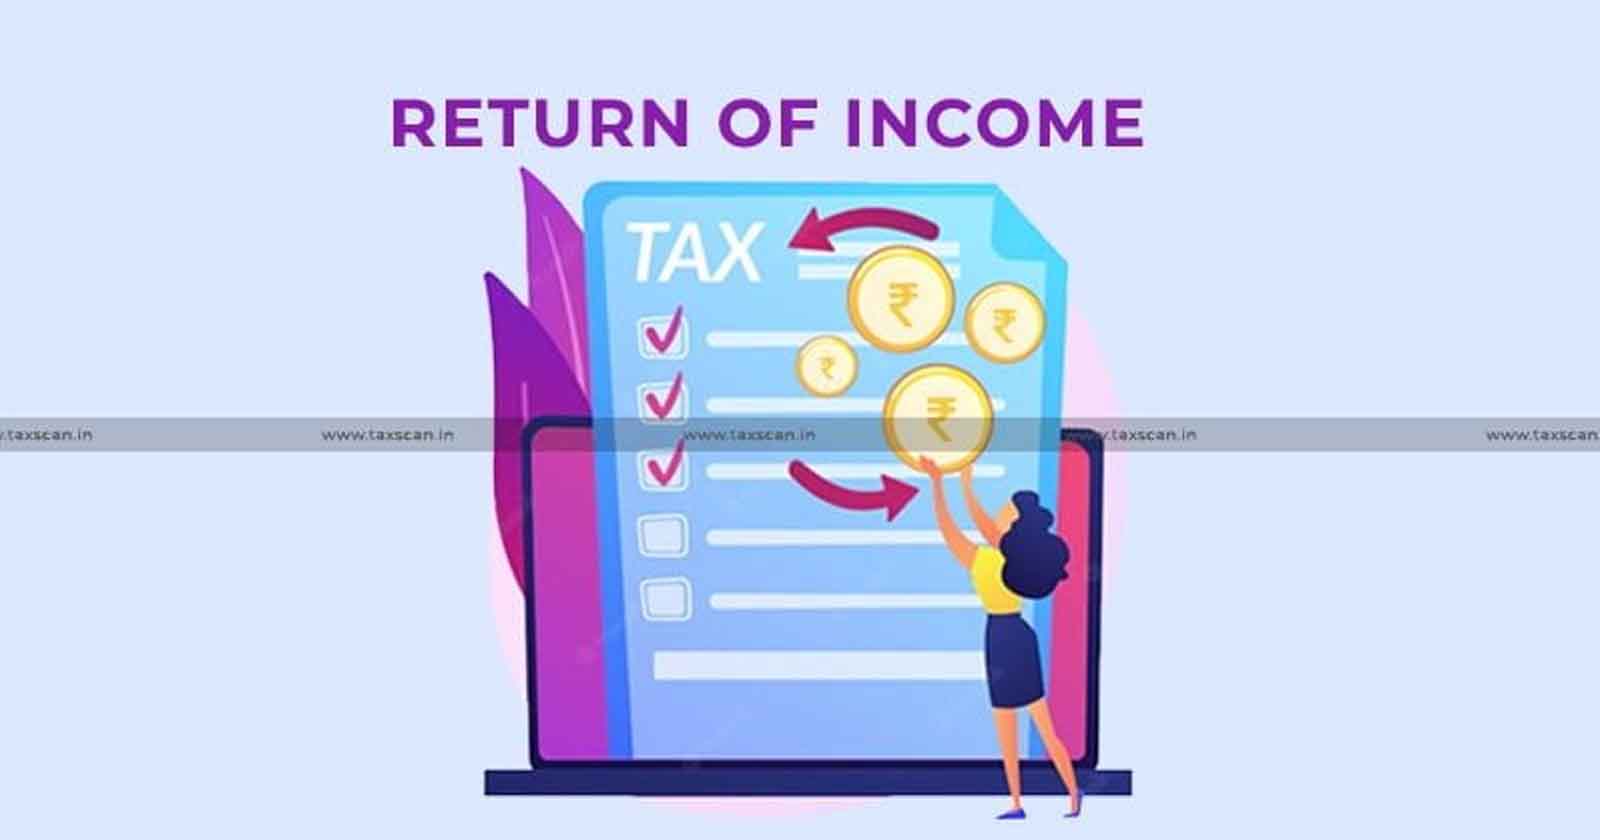 Re-adjudication - ITAT - Income Tax News - Income Tax - Tax News - condonation - directs re-adjudication - Return of Income Belatedly - TAXSCAN